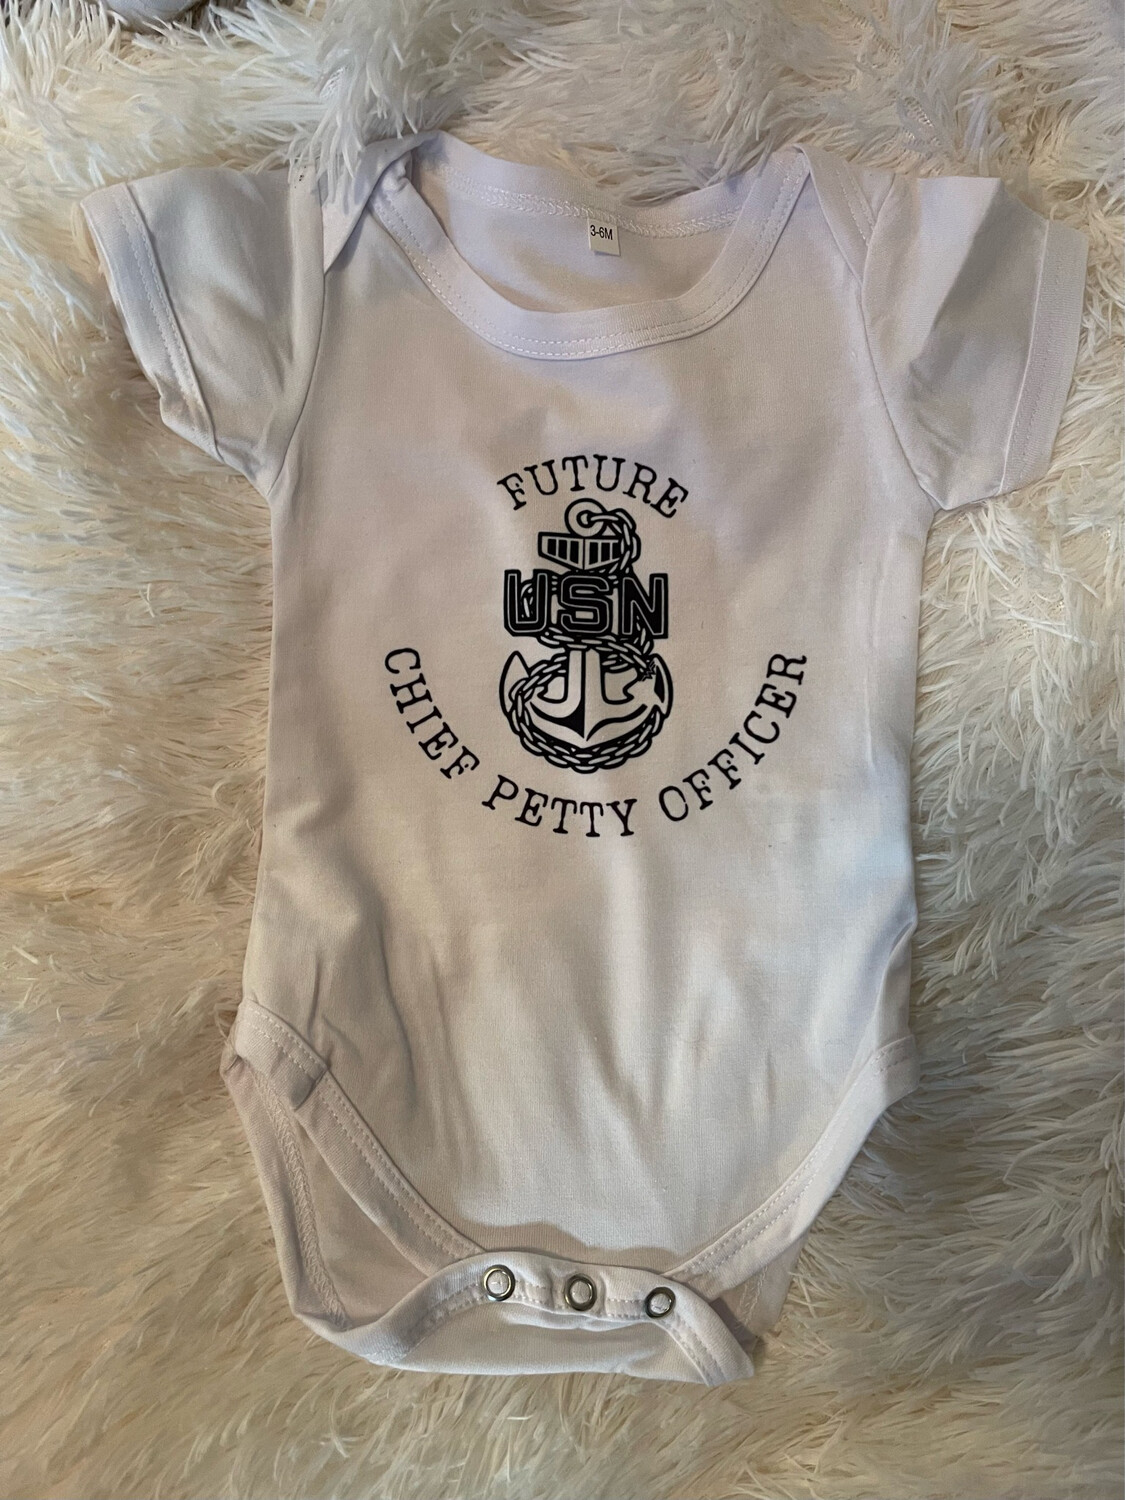 Future Chief Petty Officer Onesie, Toddler and/or Youth T- Shirt 
Onesie/Shirt Color: White and Design Print: Black **Please allow 5 weekdays to ship, once order placed.
***Shipping included